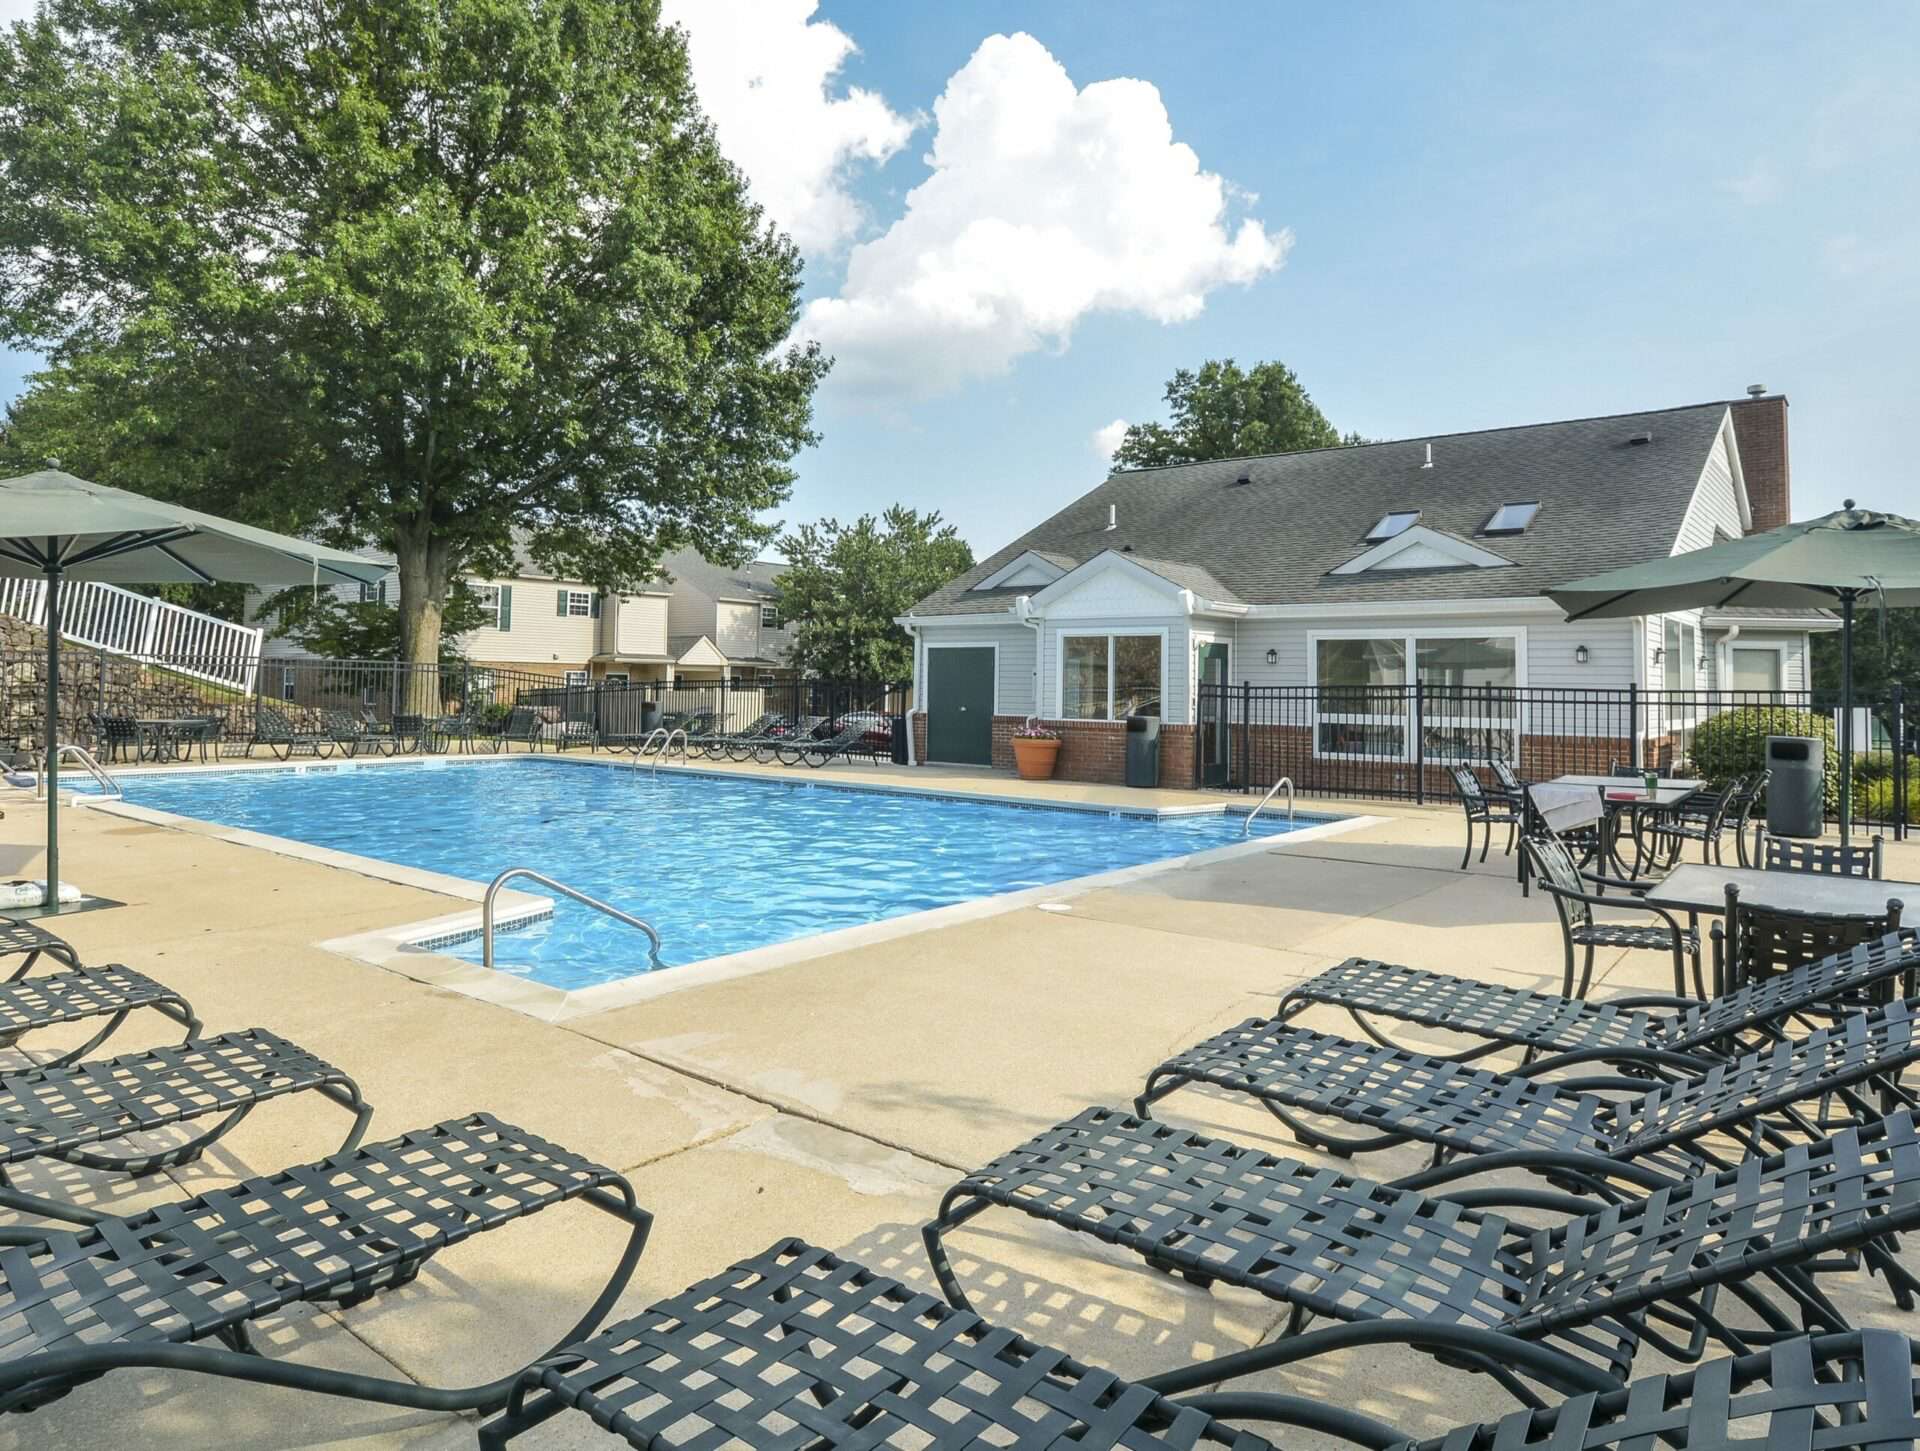 Wyntre Brooke Apartments dazzling pool with loungers